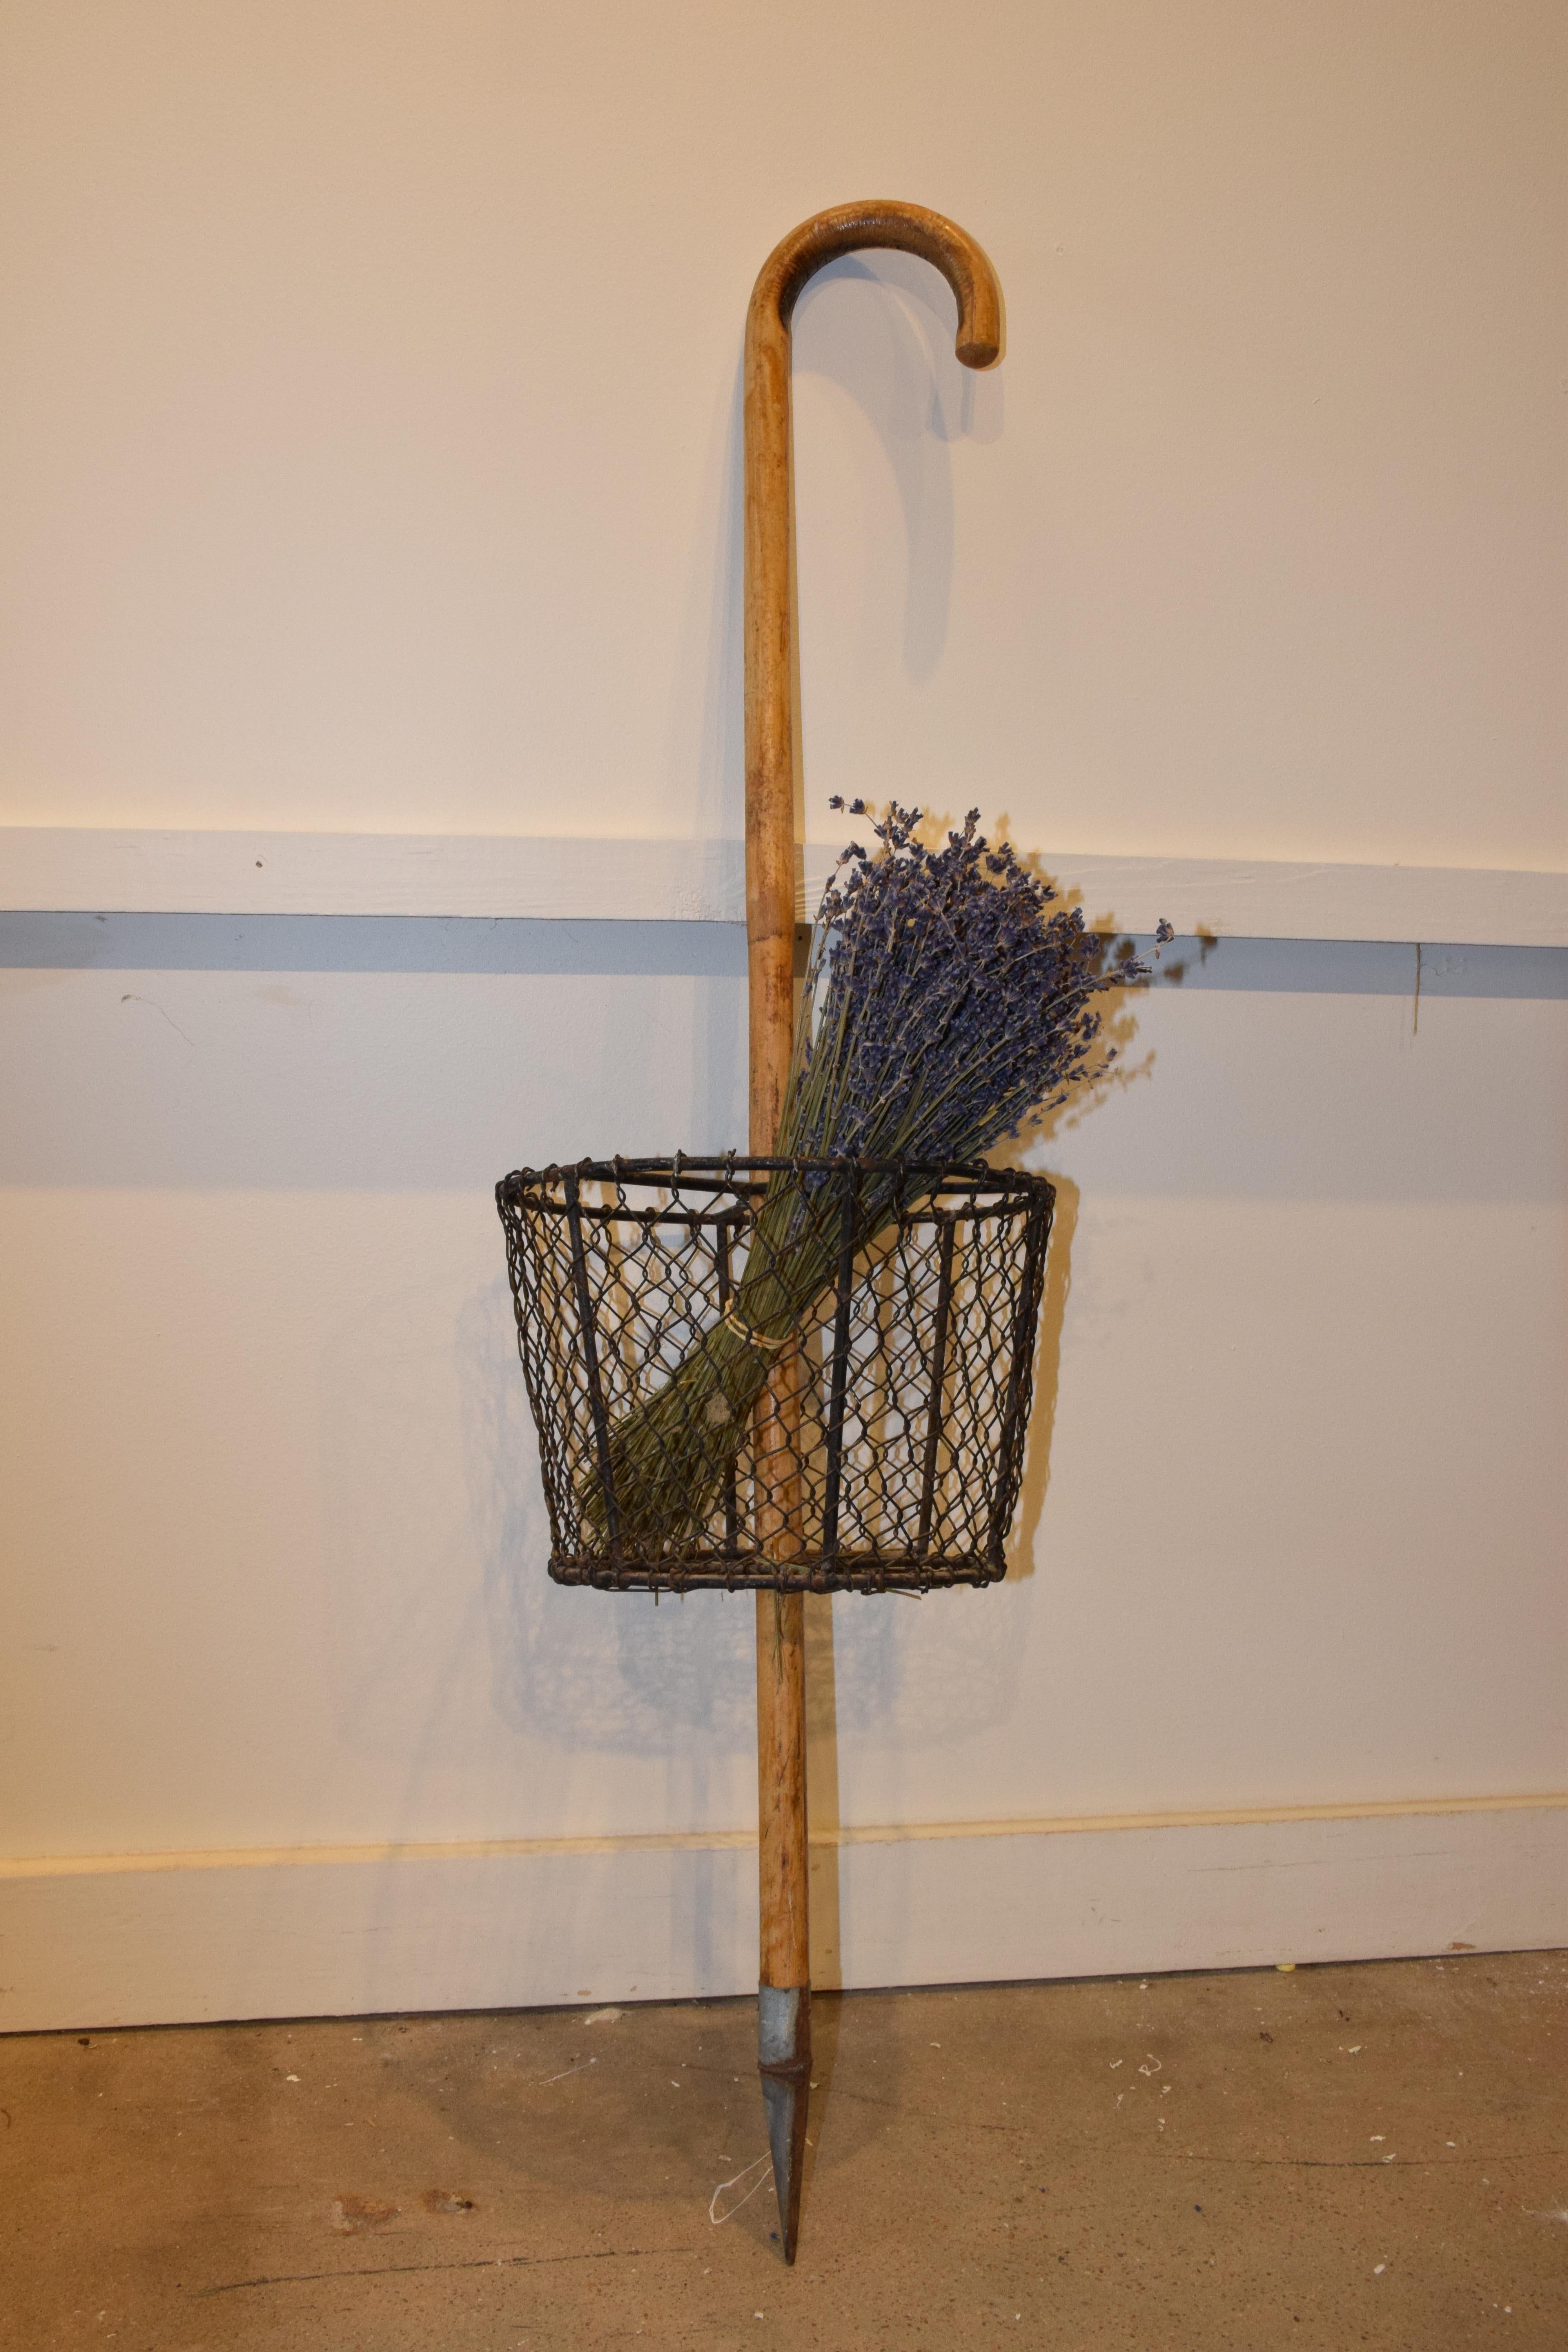 This vintage French gathering basket and cane will be a wonderful addition to your gardening hobbies. The wire basket is attached to a wood cane center which has a pointed metal tip on the end. The cane can be used for support while walking. The